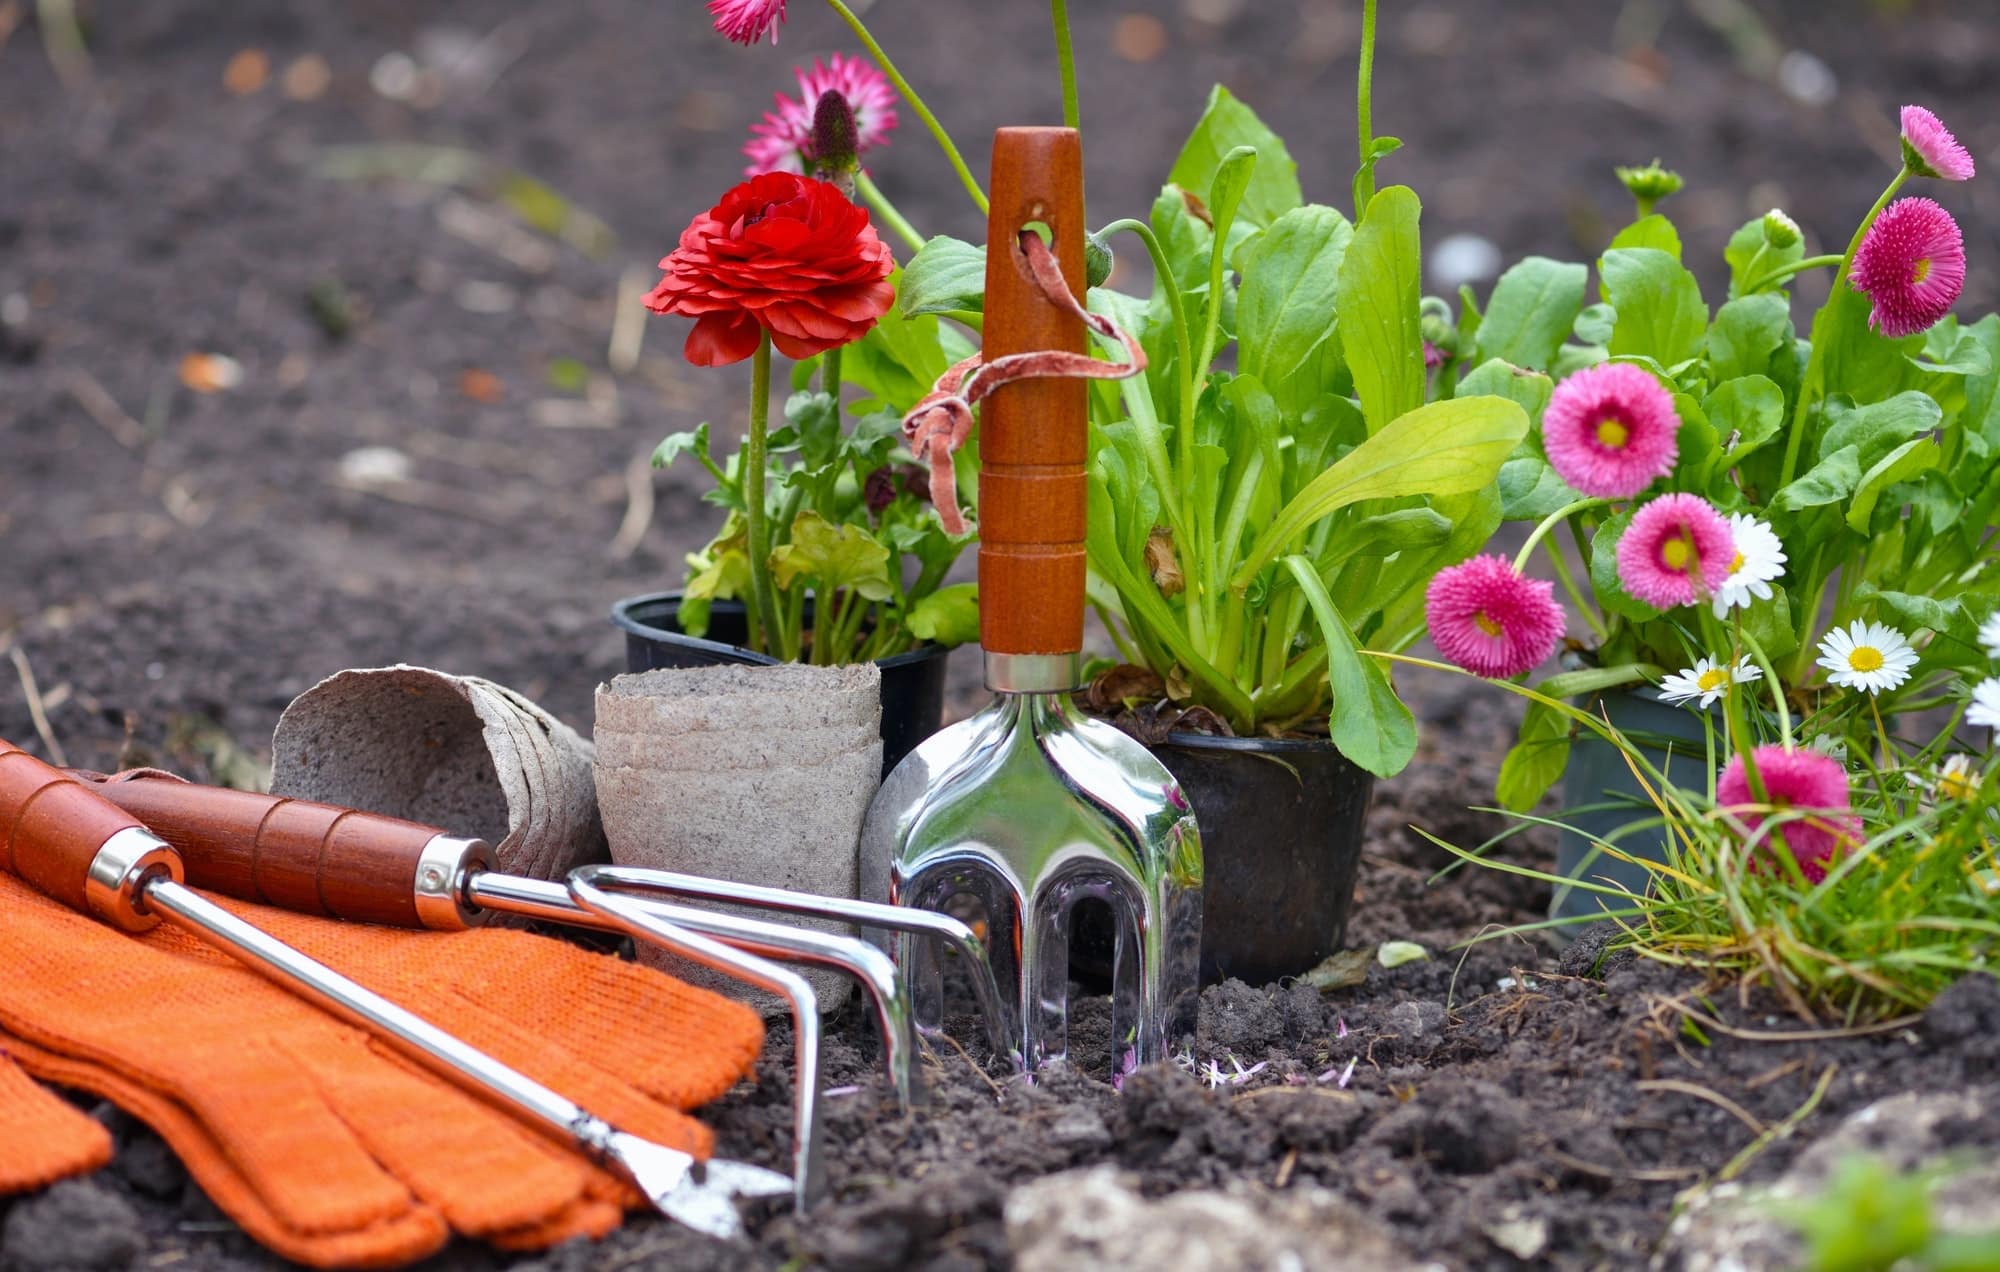 gardening-tools-and-spring-flowers-in-the-garden-gardening-concept-